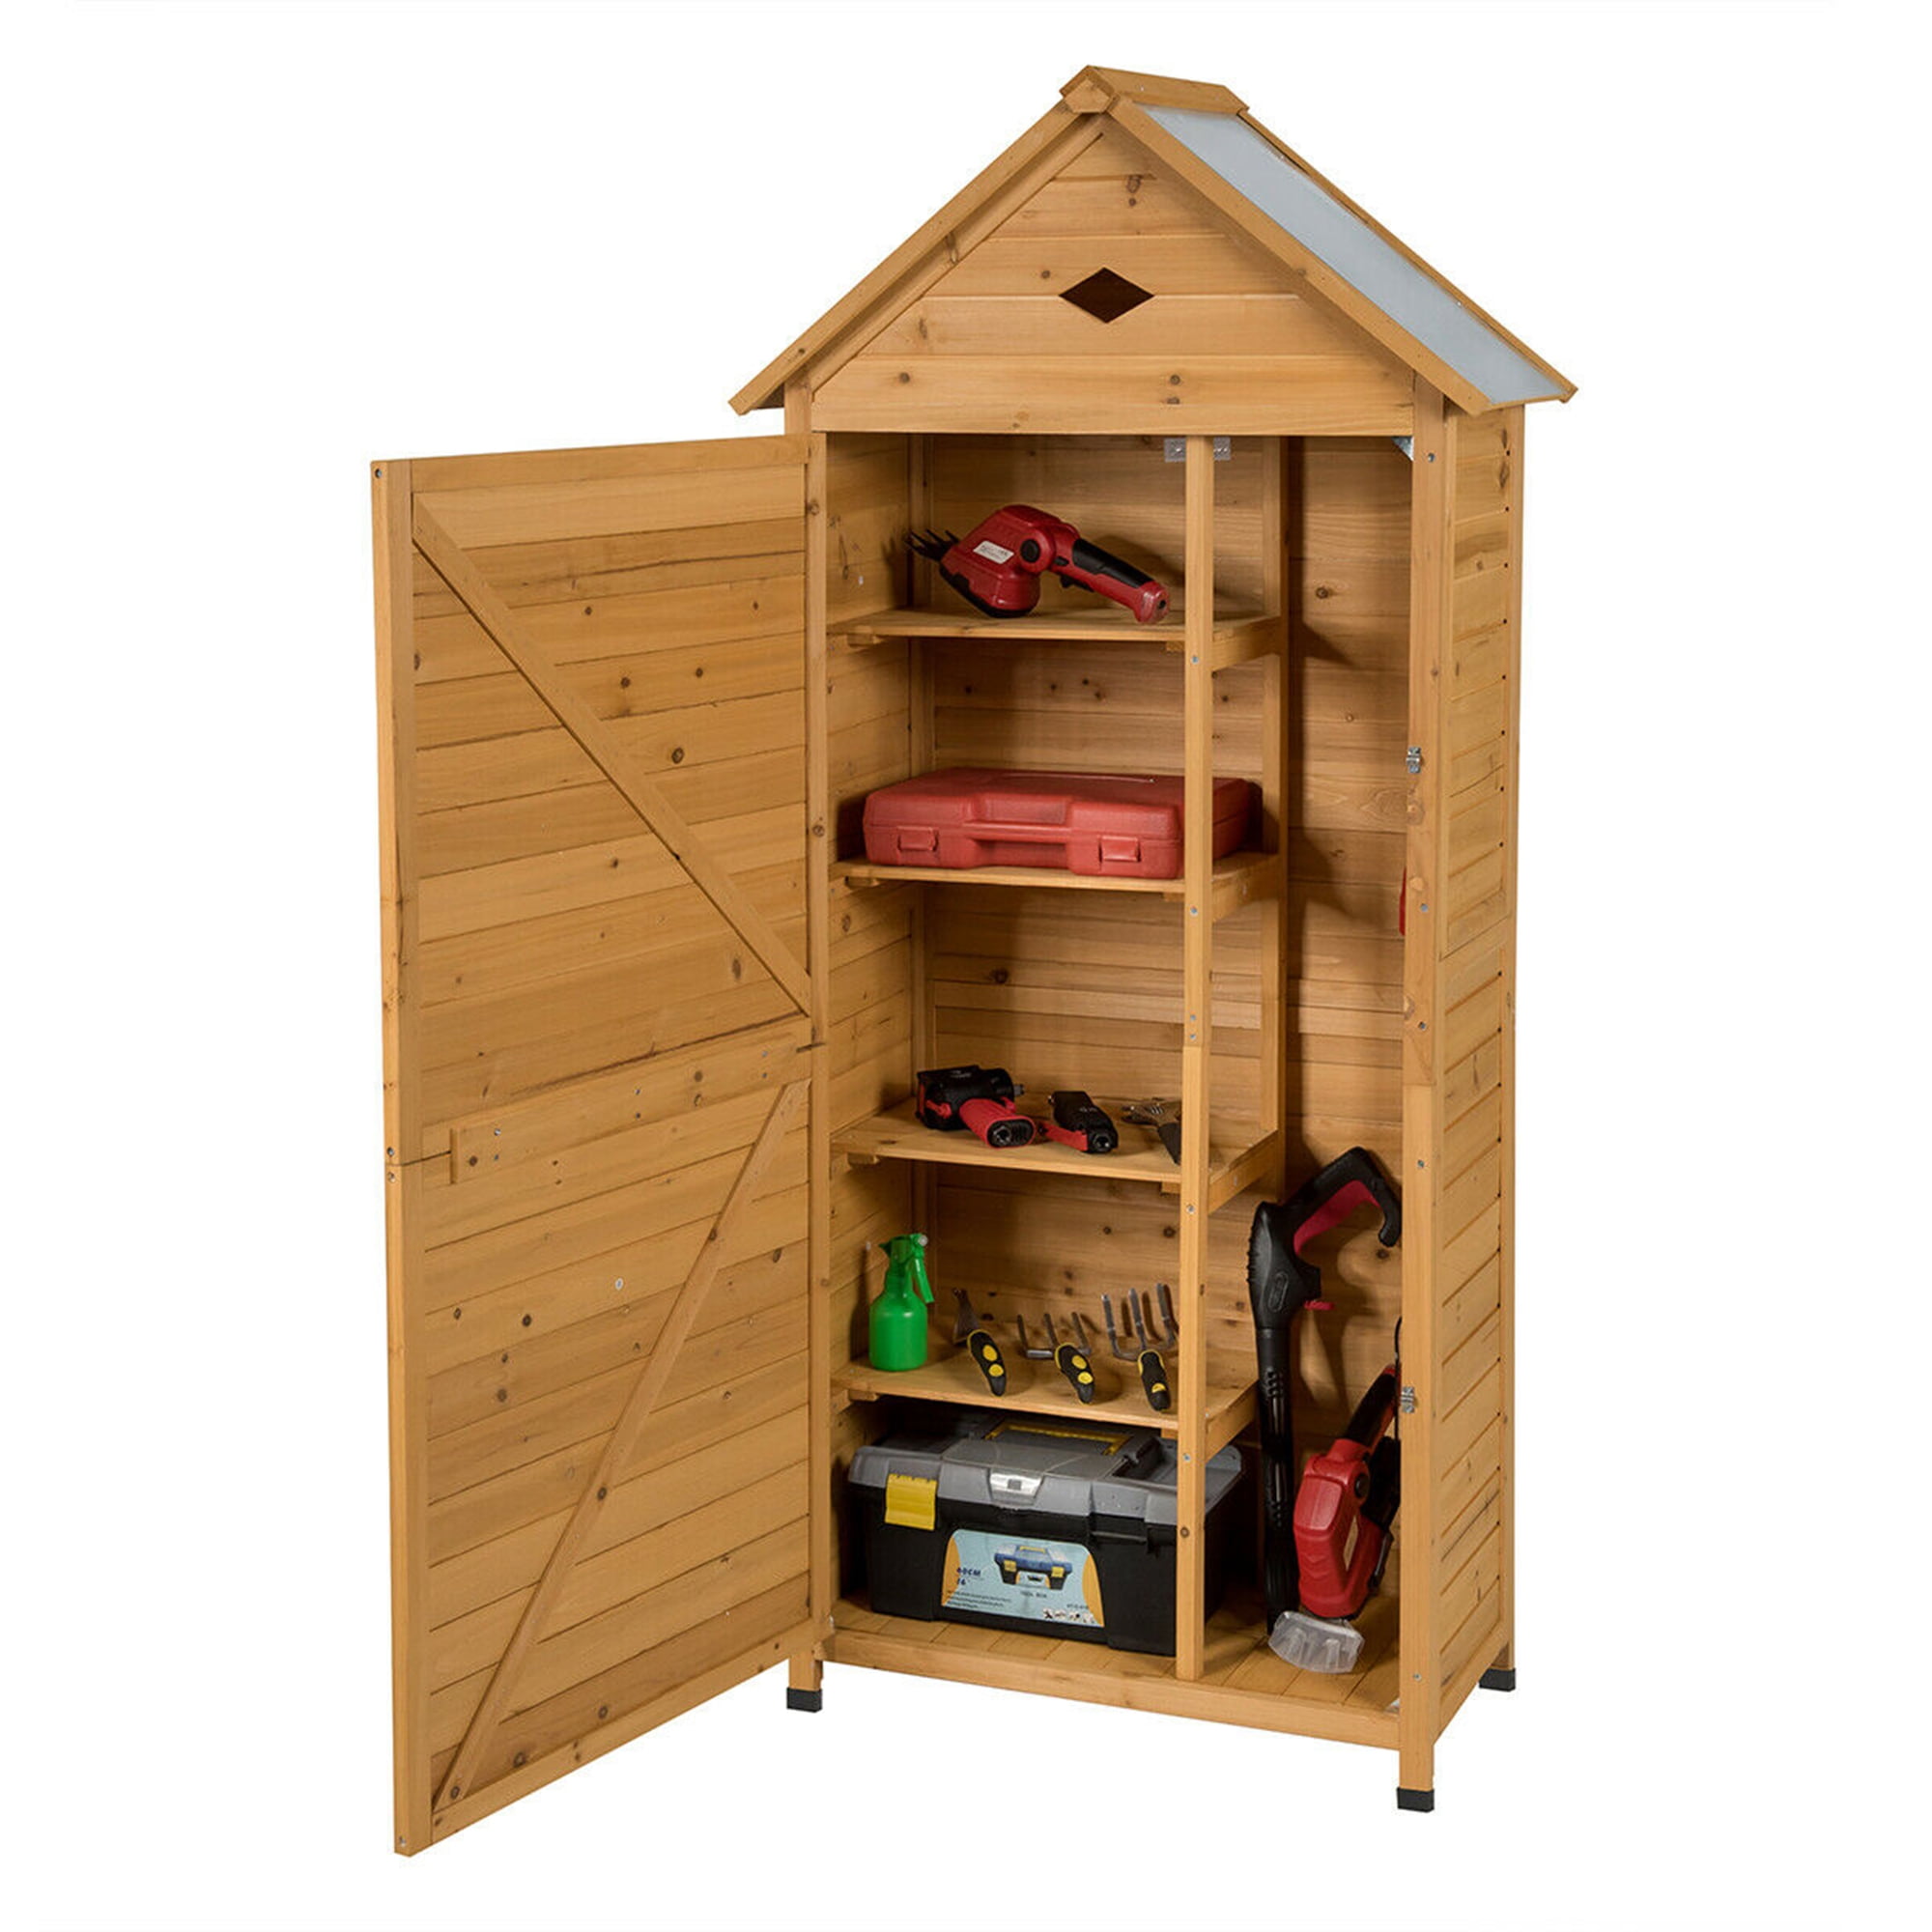 Gymax Outdoor Storage Shed Lockable, Storage Shed Cabinet